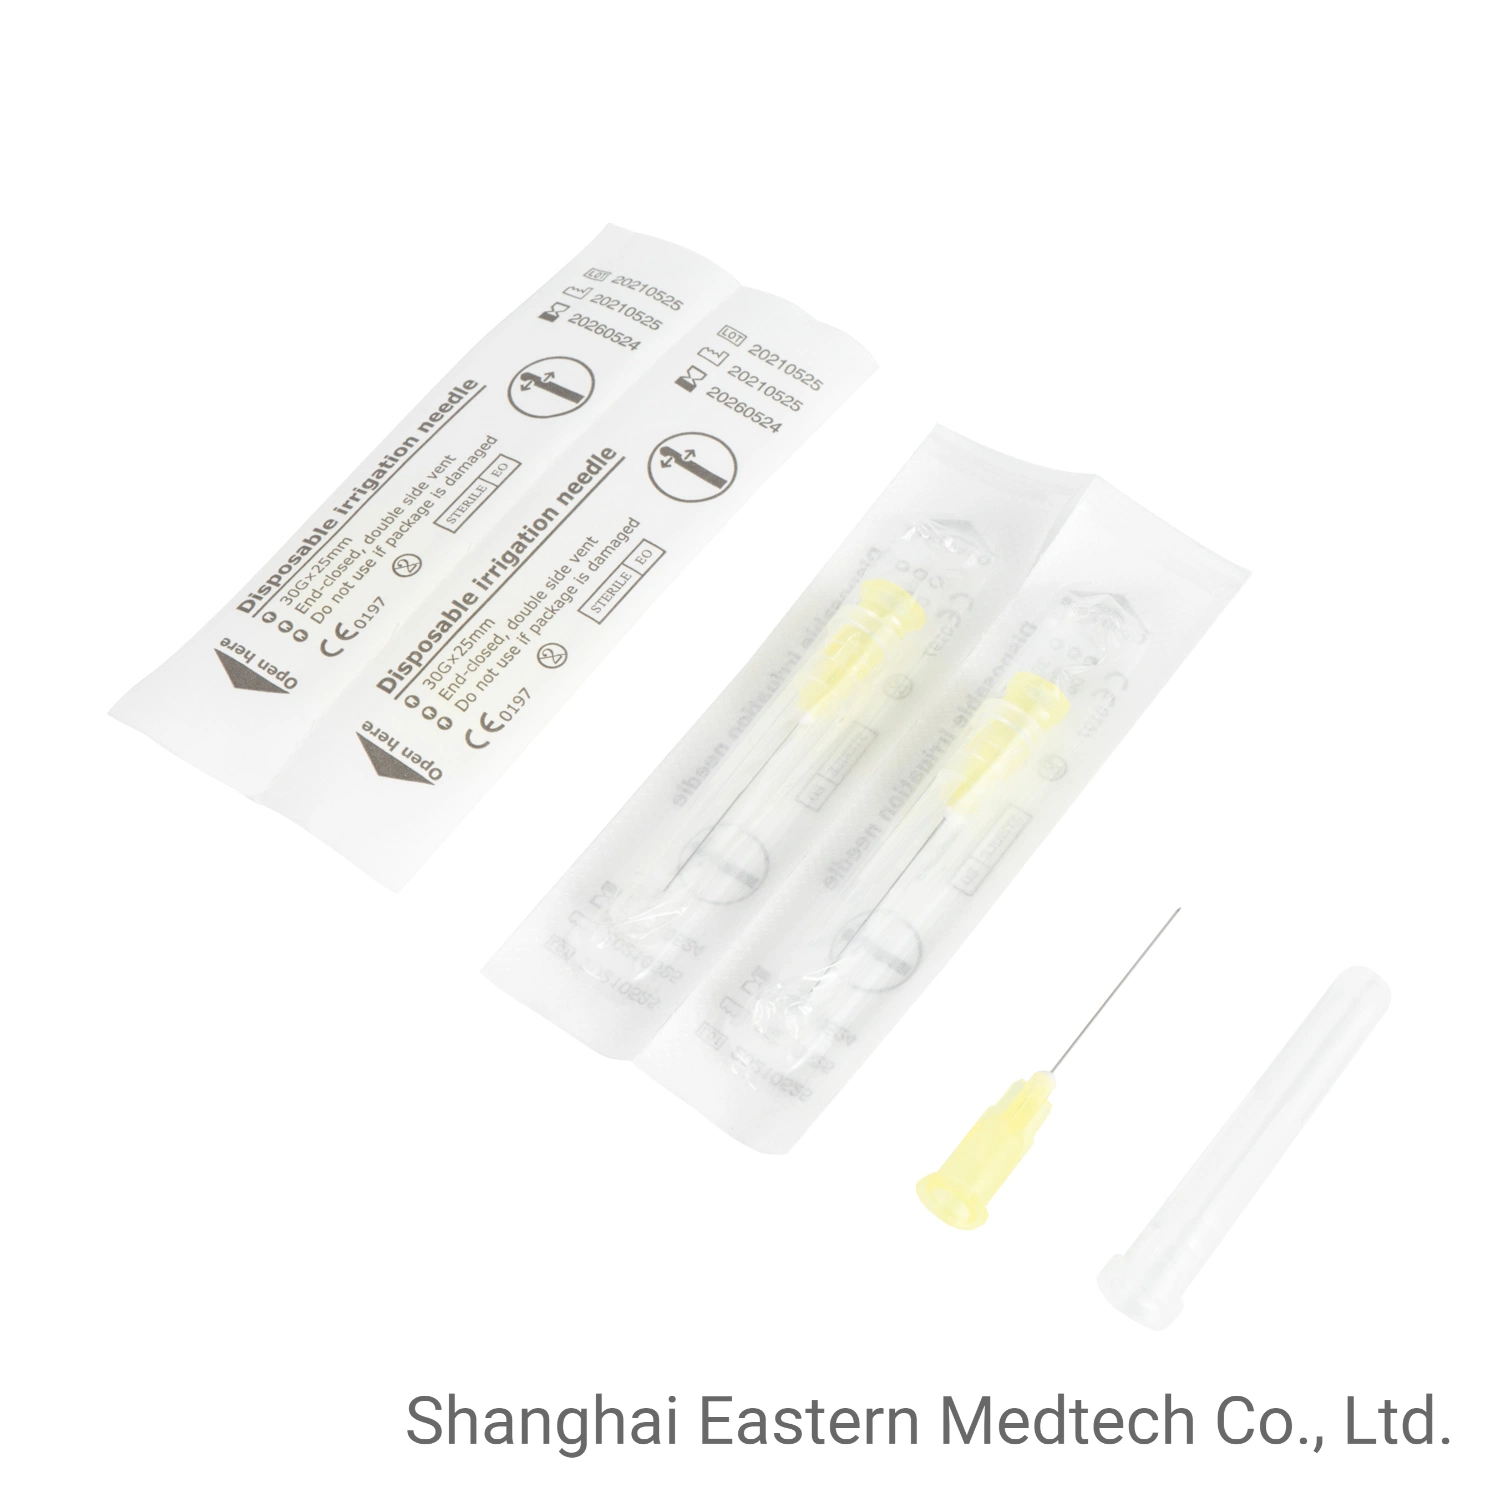 Medical Device Disposable for Dentist Use 23G/25g/ 27g / 30g Endo Irrigation Needle Tip Dental Application/Irrigation Needle